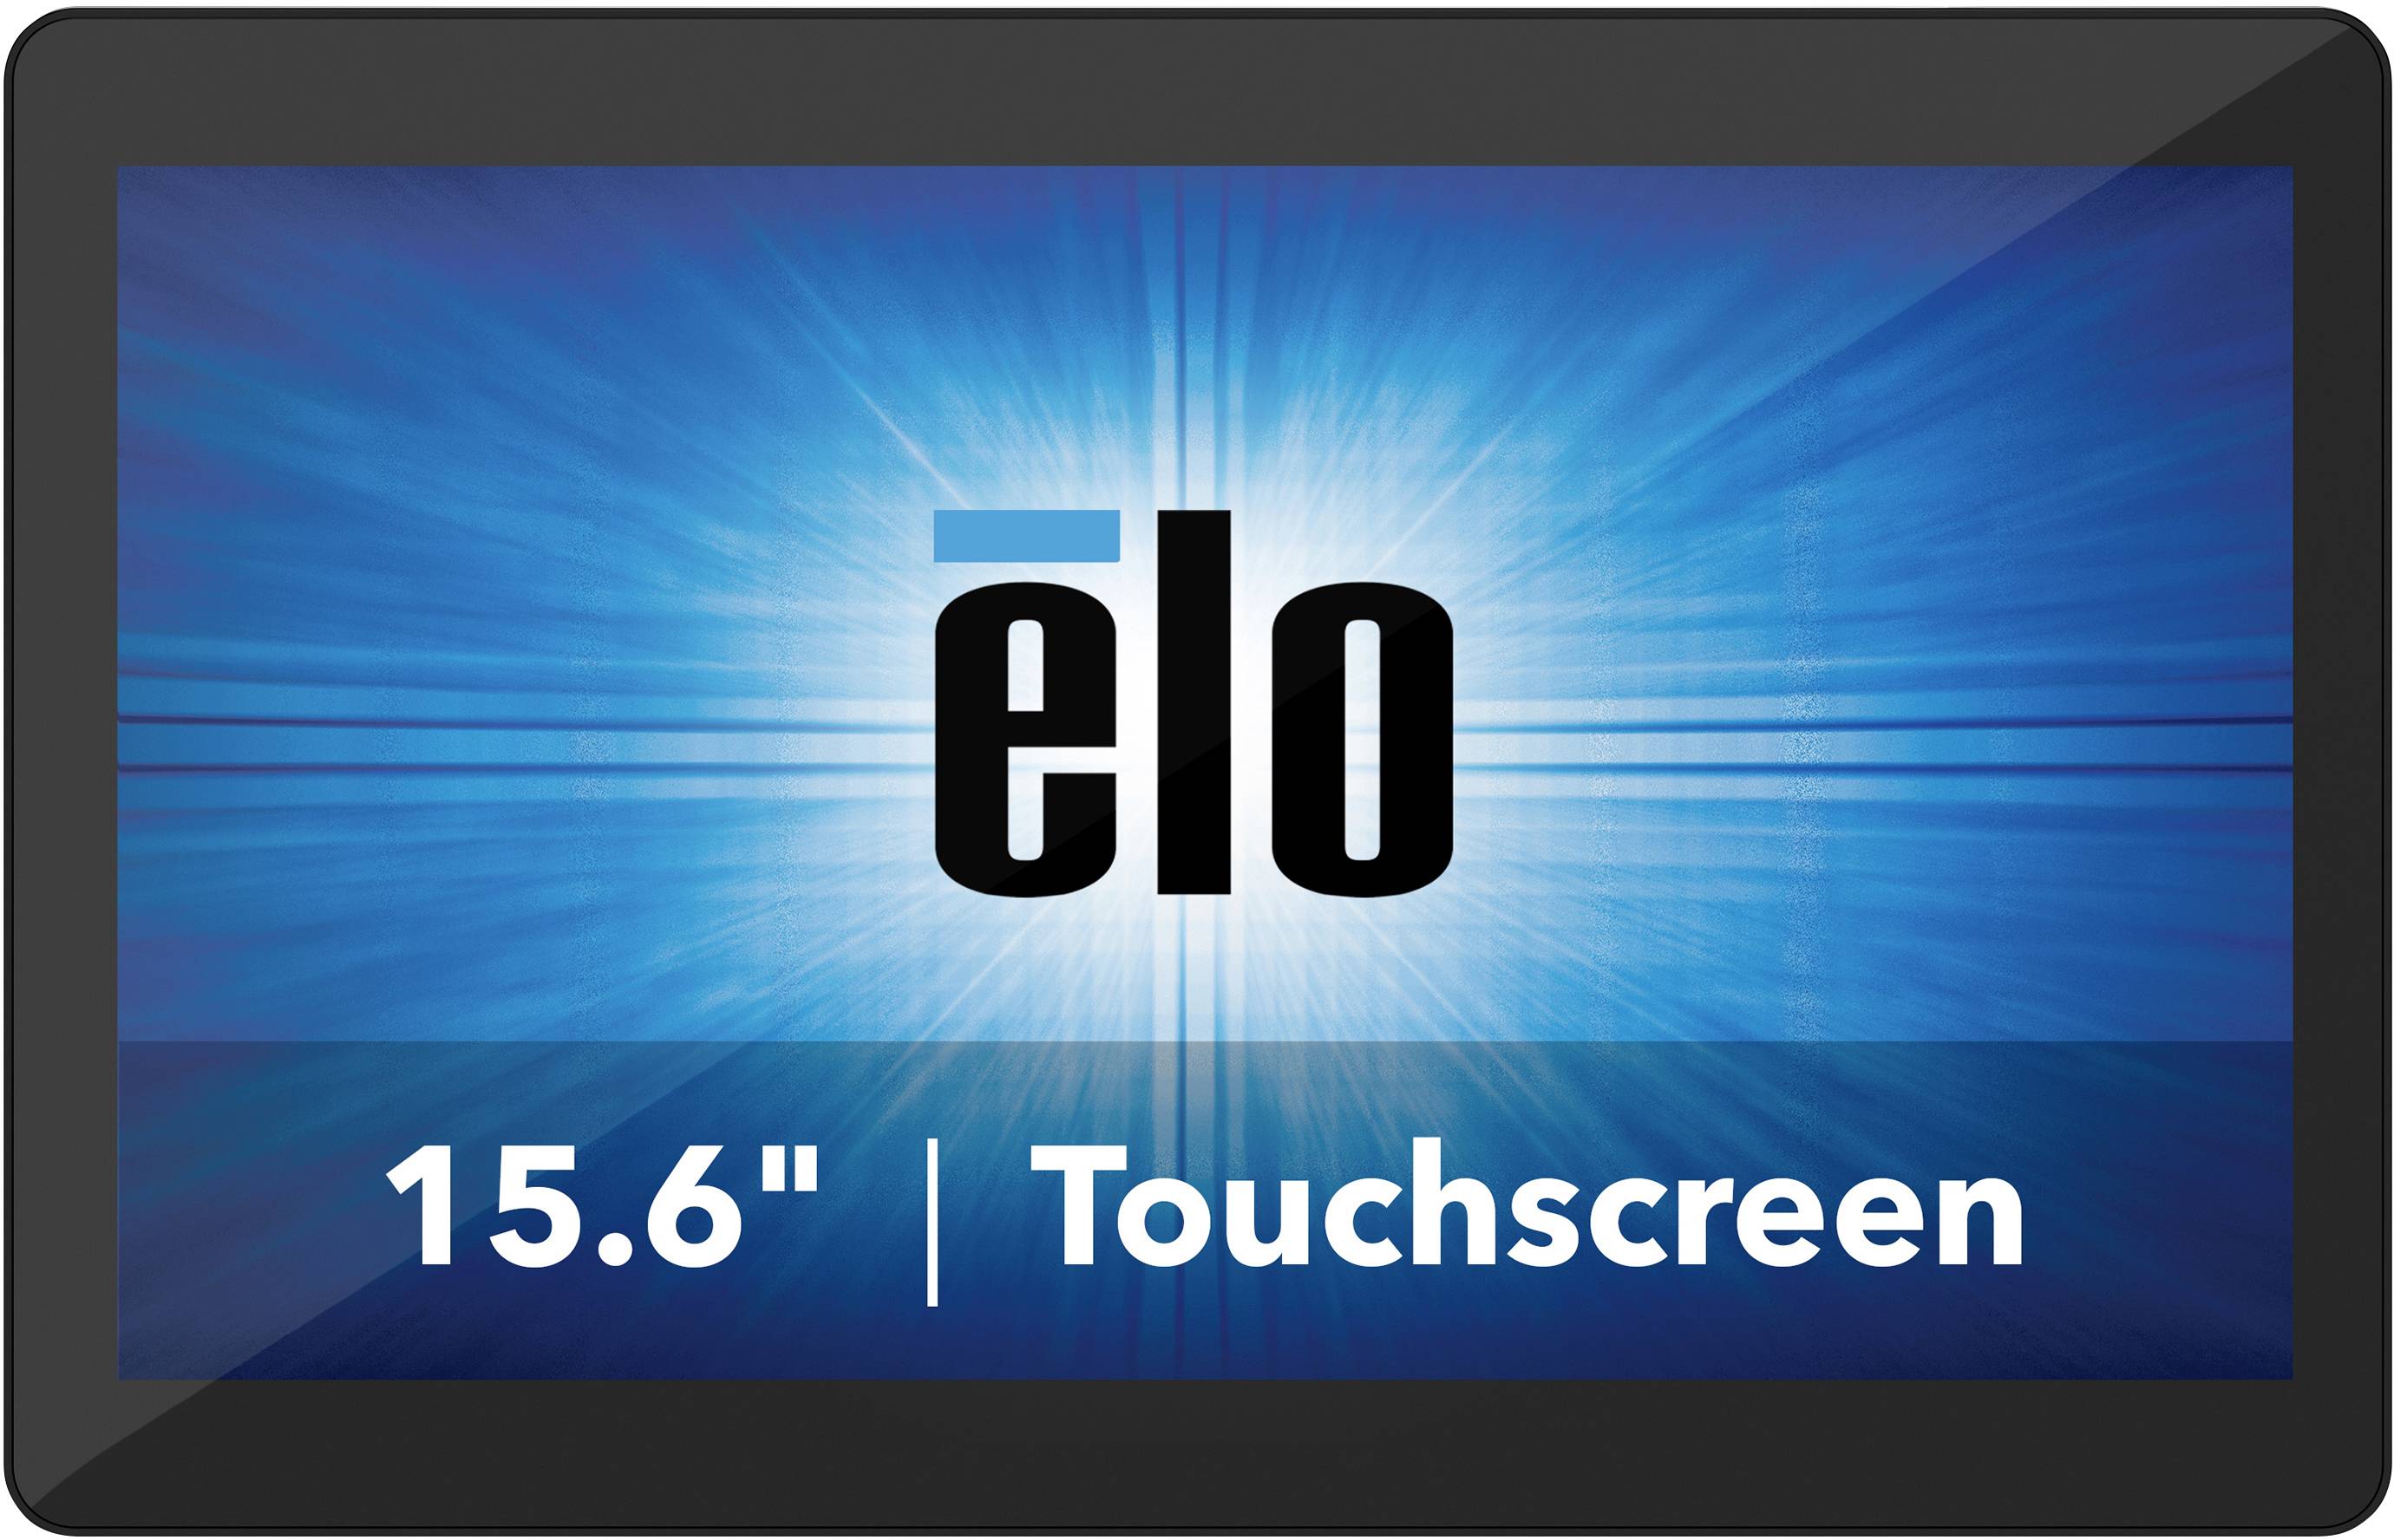 shampoo tre rolle elo Touch Solution All-in-one PC I-Series 2.0 38.1 cm (15 tommer) Full  HDIntel® Core™ i5;i5-8500T8 GB RAM128 GB SSD | Conradelektronik.dk